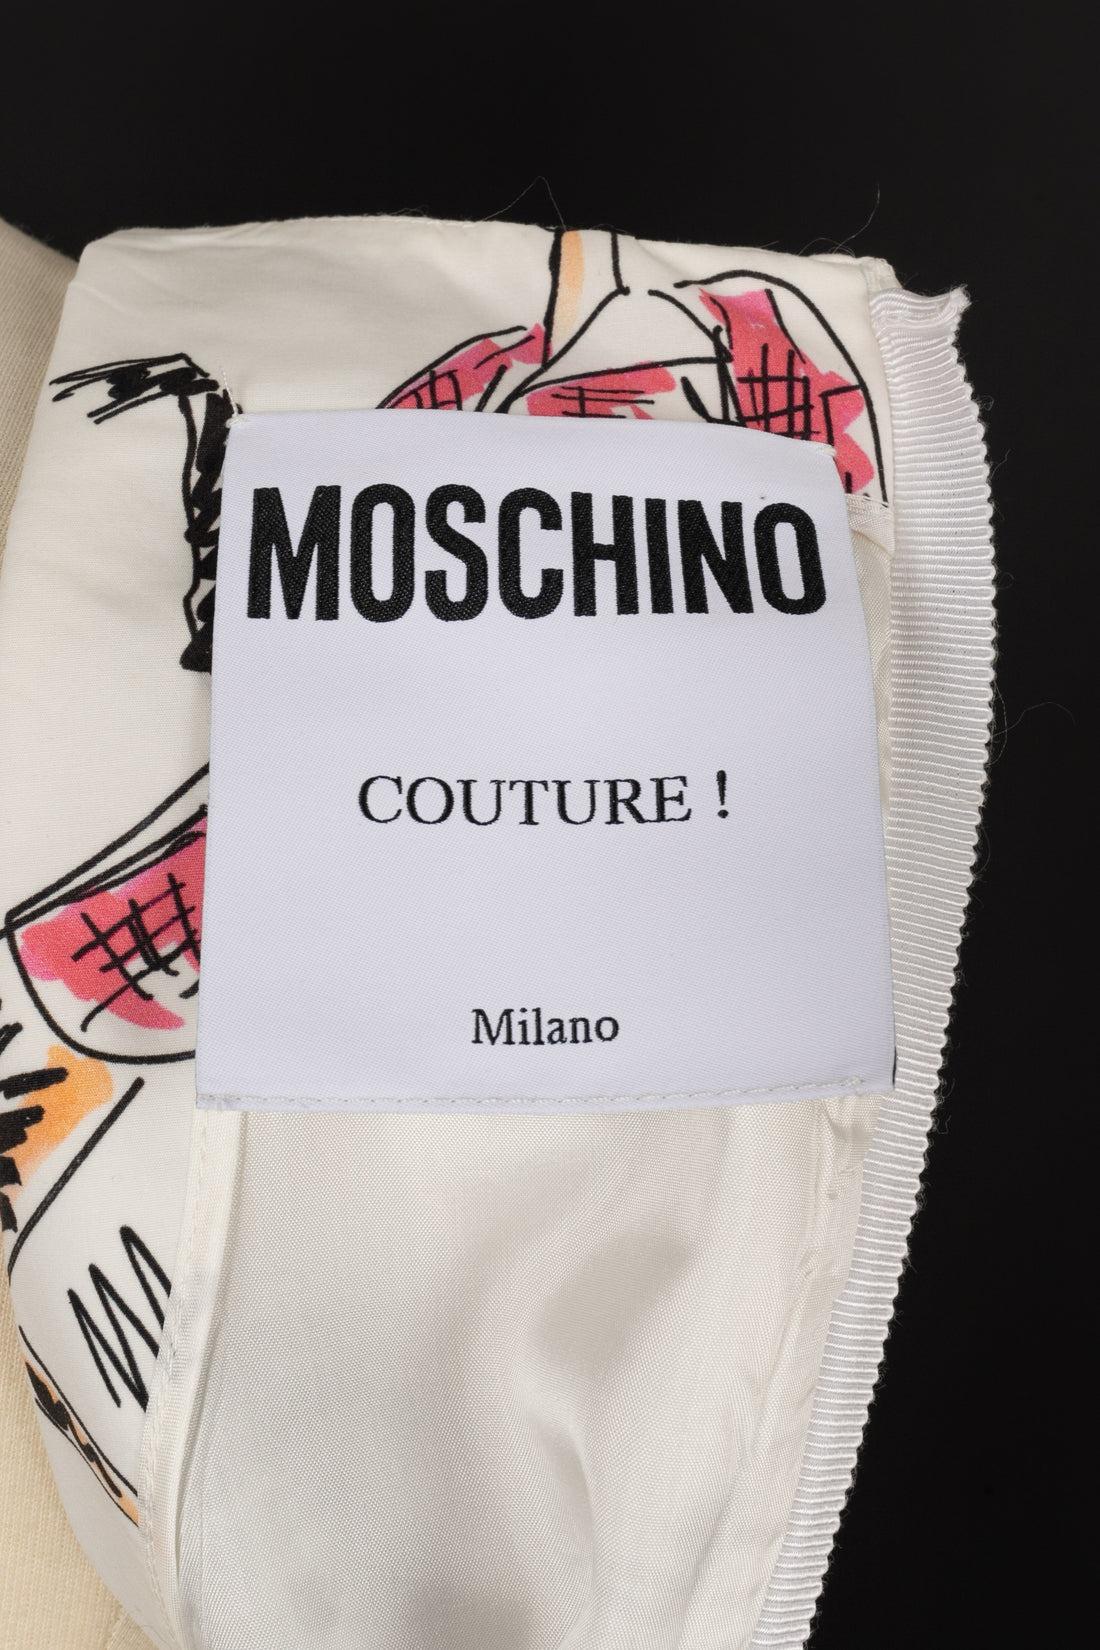 Moschino Cotton Dress Printed with Multicolored Patterns, 2019 For Sale 5